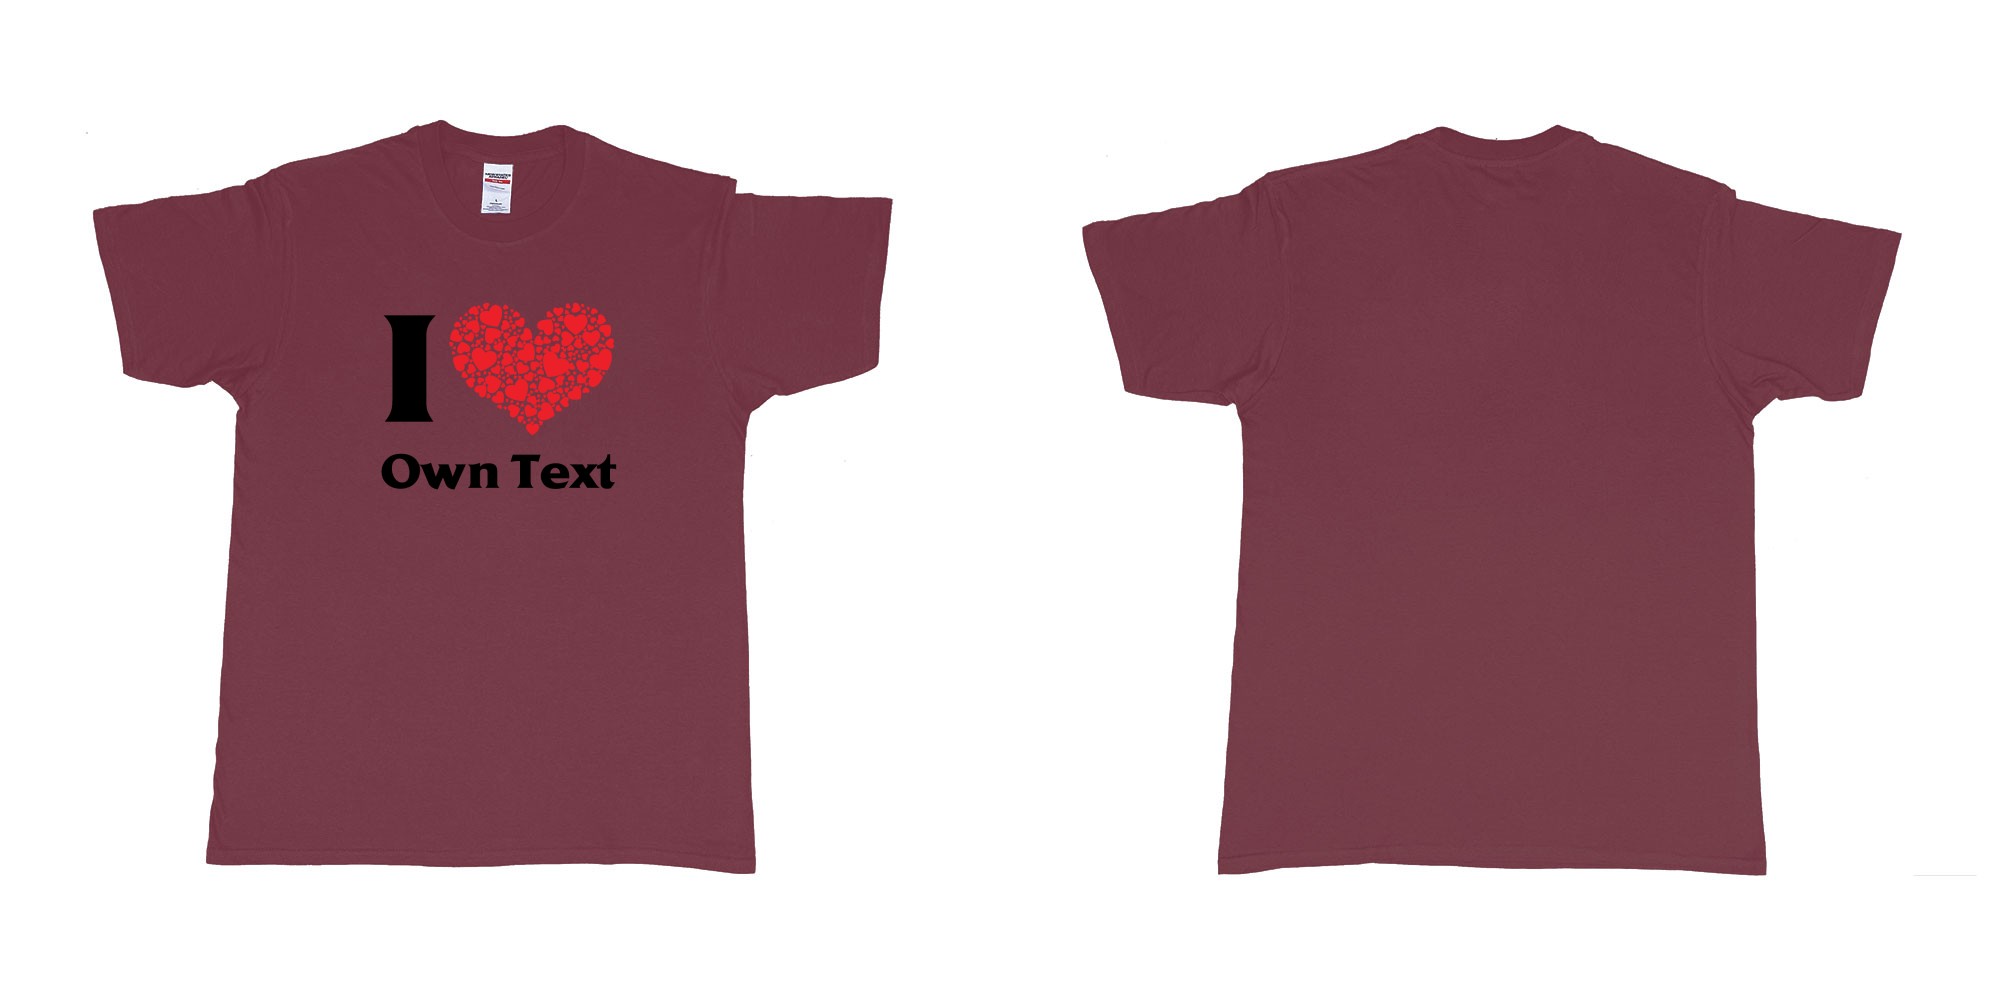 Custom tshirt design i loveheart custom own text bali tees mom dad beach kuta in fabric color marron choice your own text made in Bali by The Pirate Way